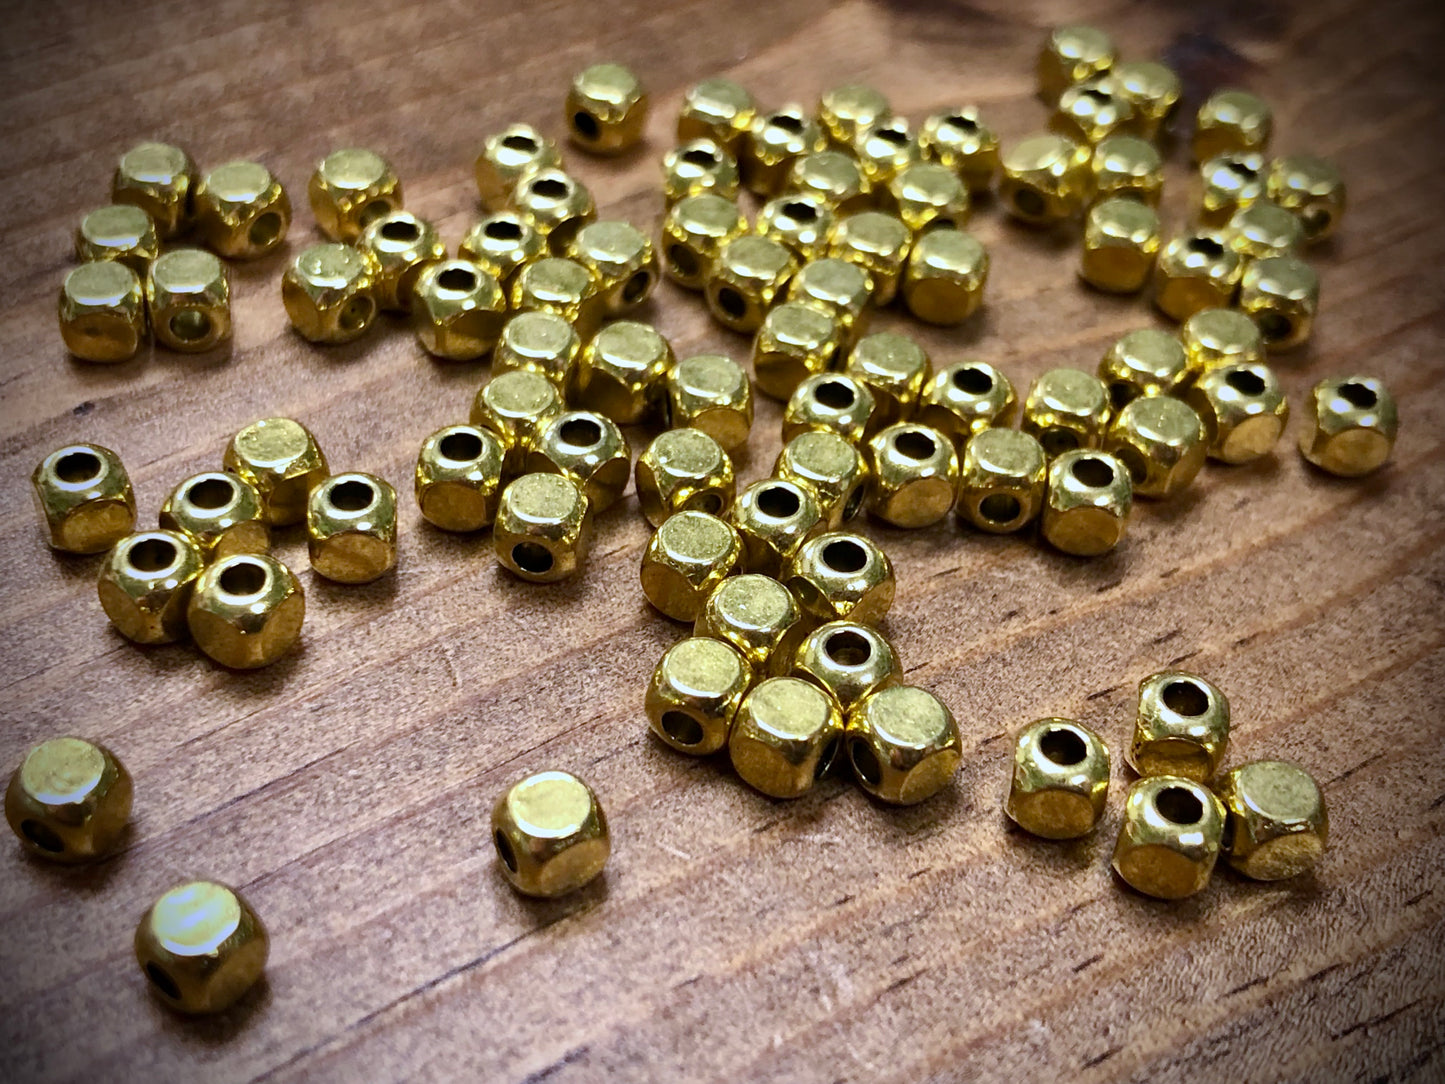 Gold Tone Pewter Spacers Set - 4mm Rounded Cubes